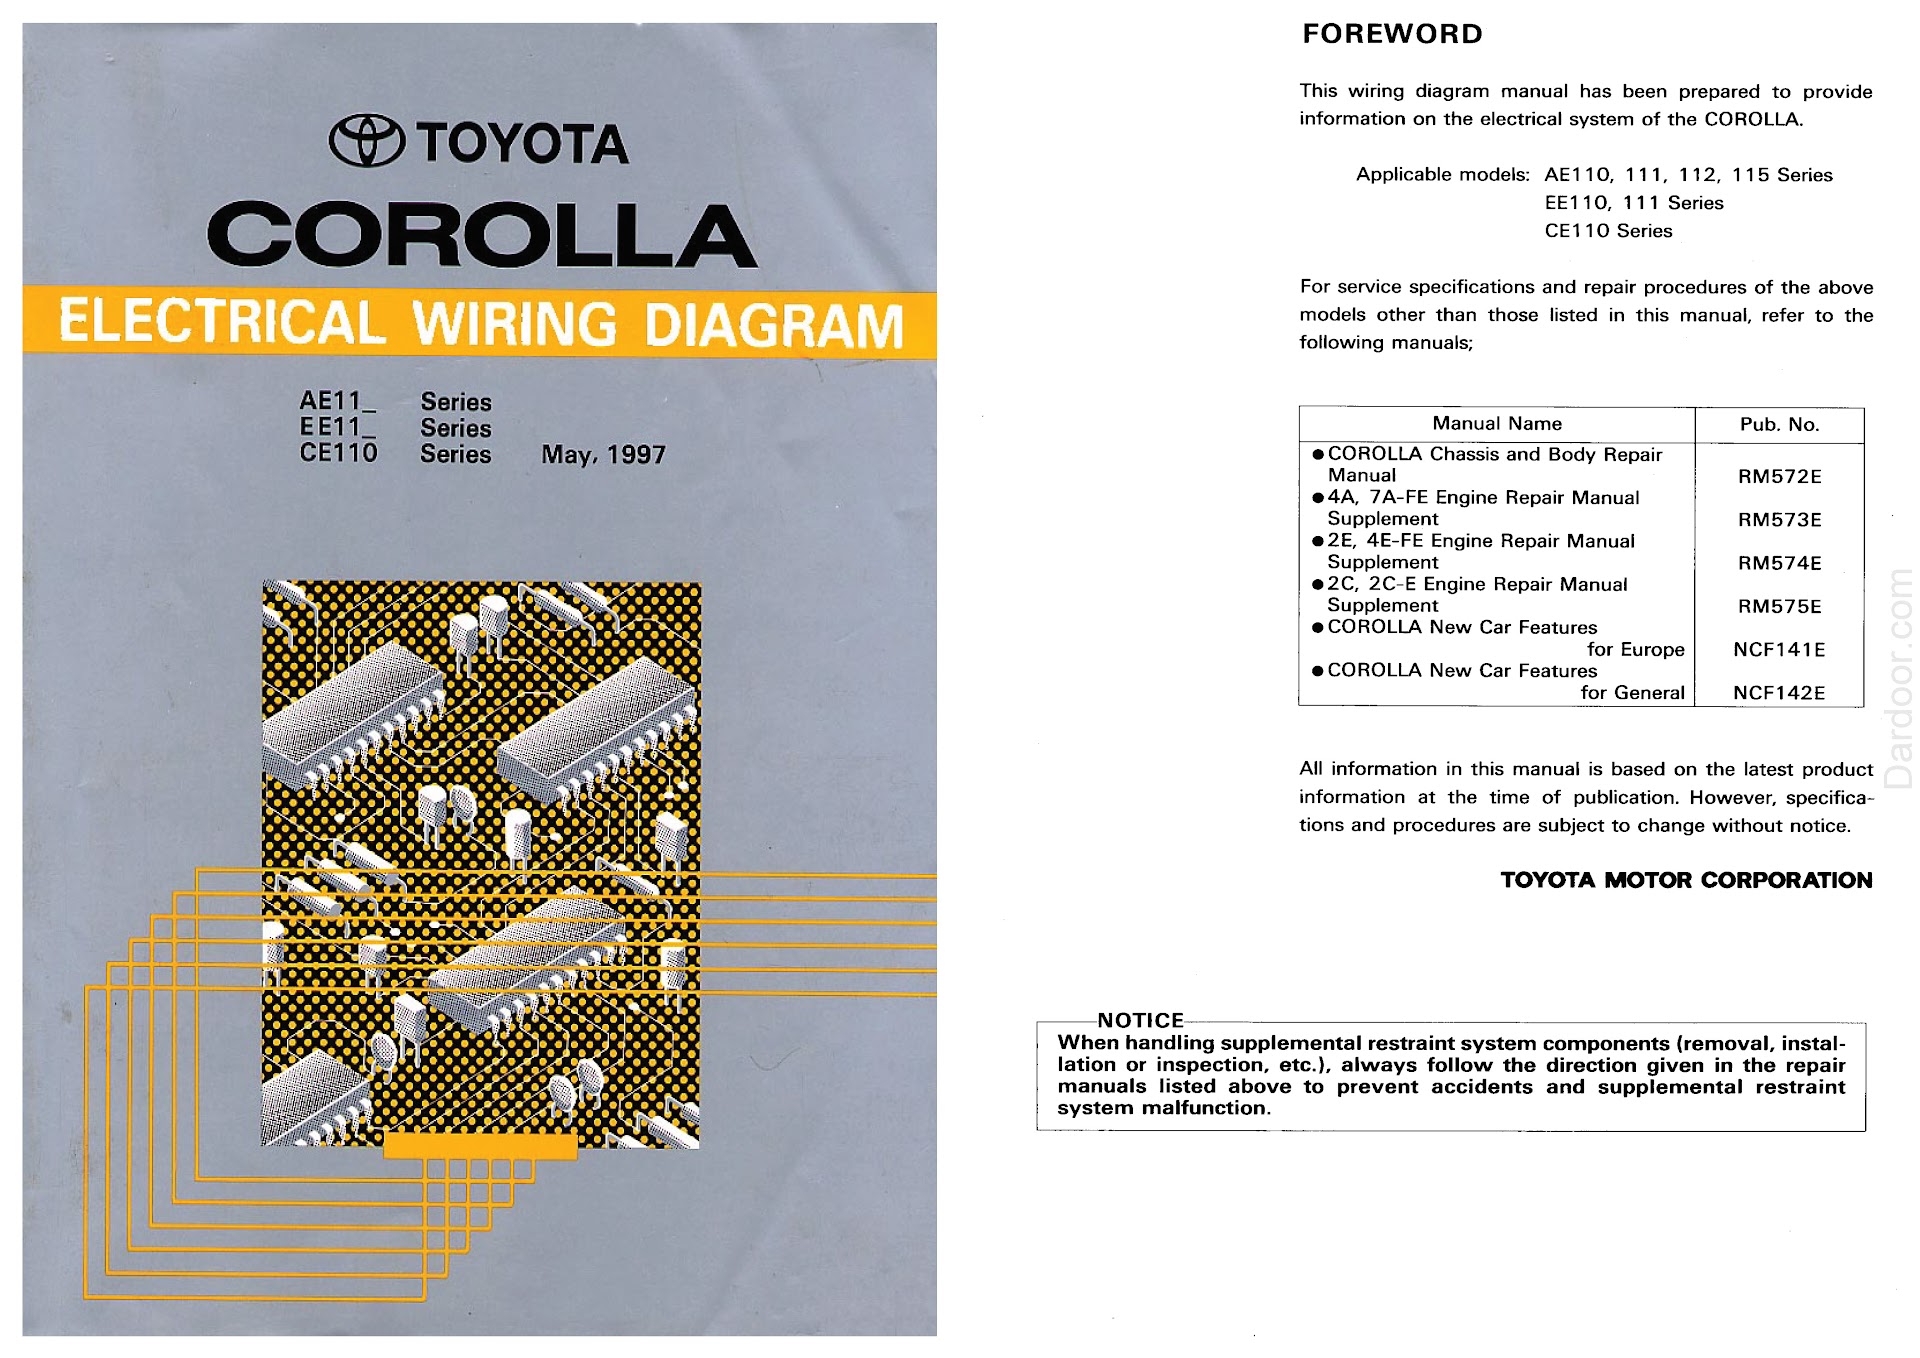 1997-2002 toyota corolla electrical wiring diagrams cover page